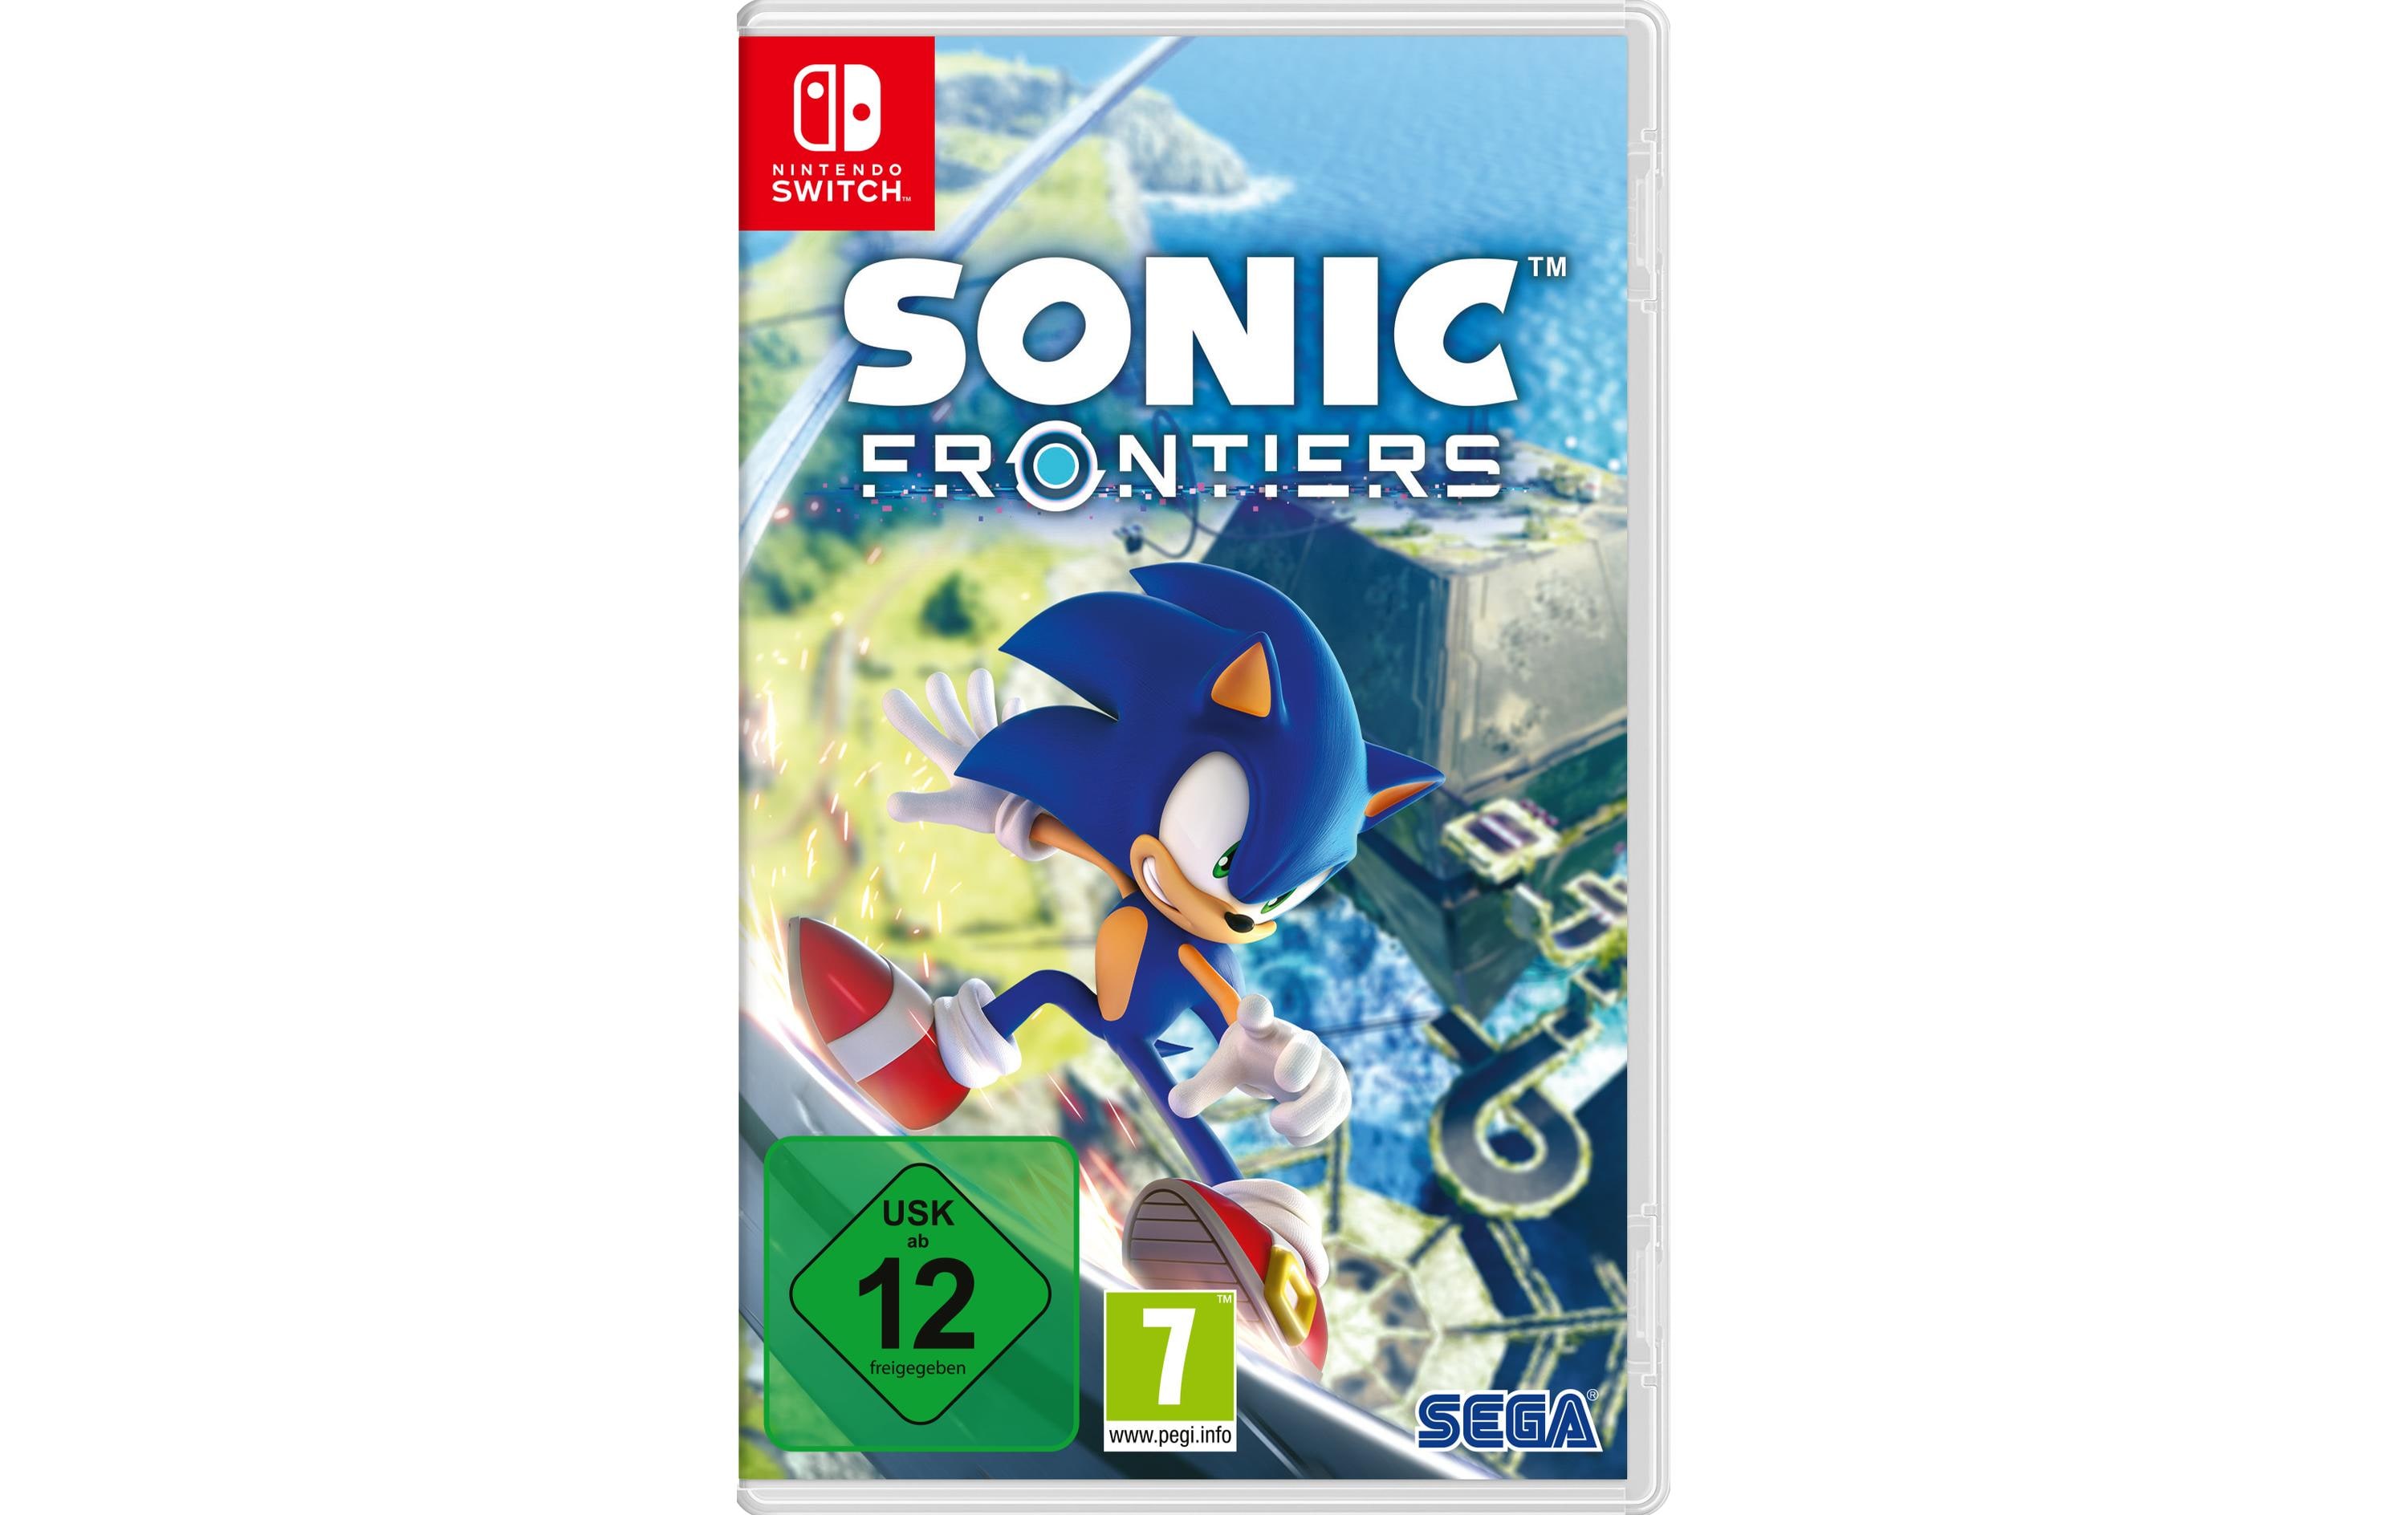 SEGA Sonic Frontiers Day One Edition